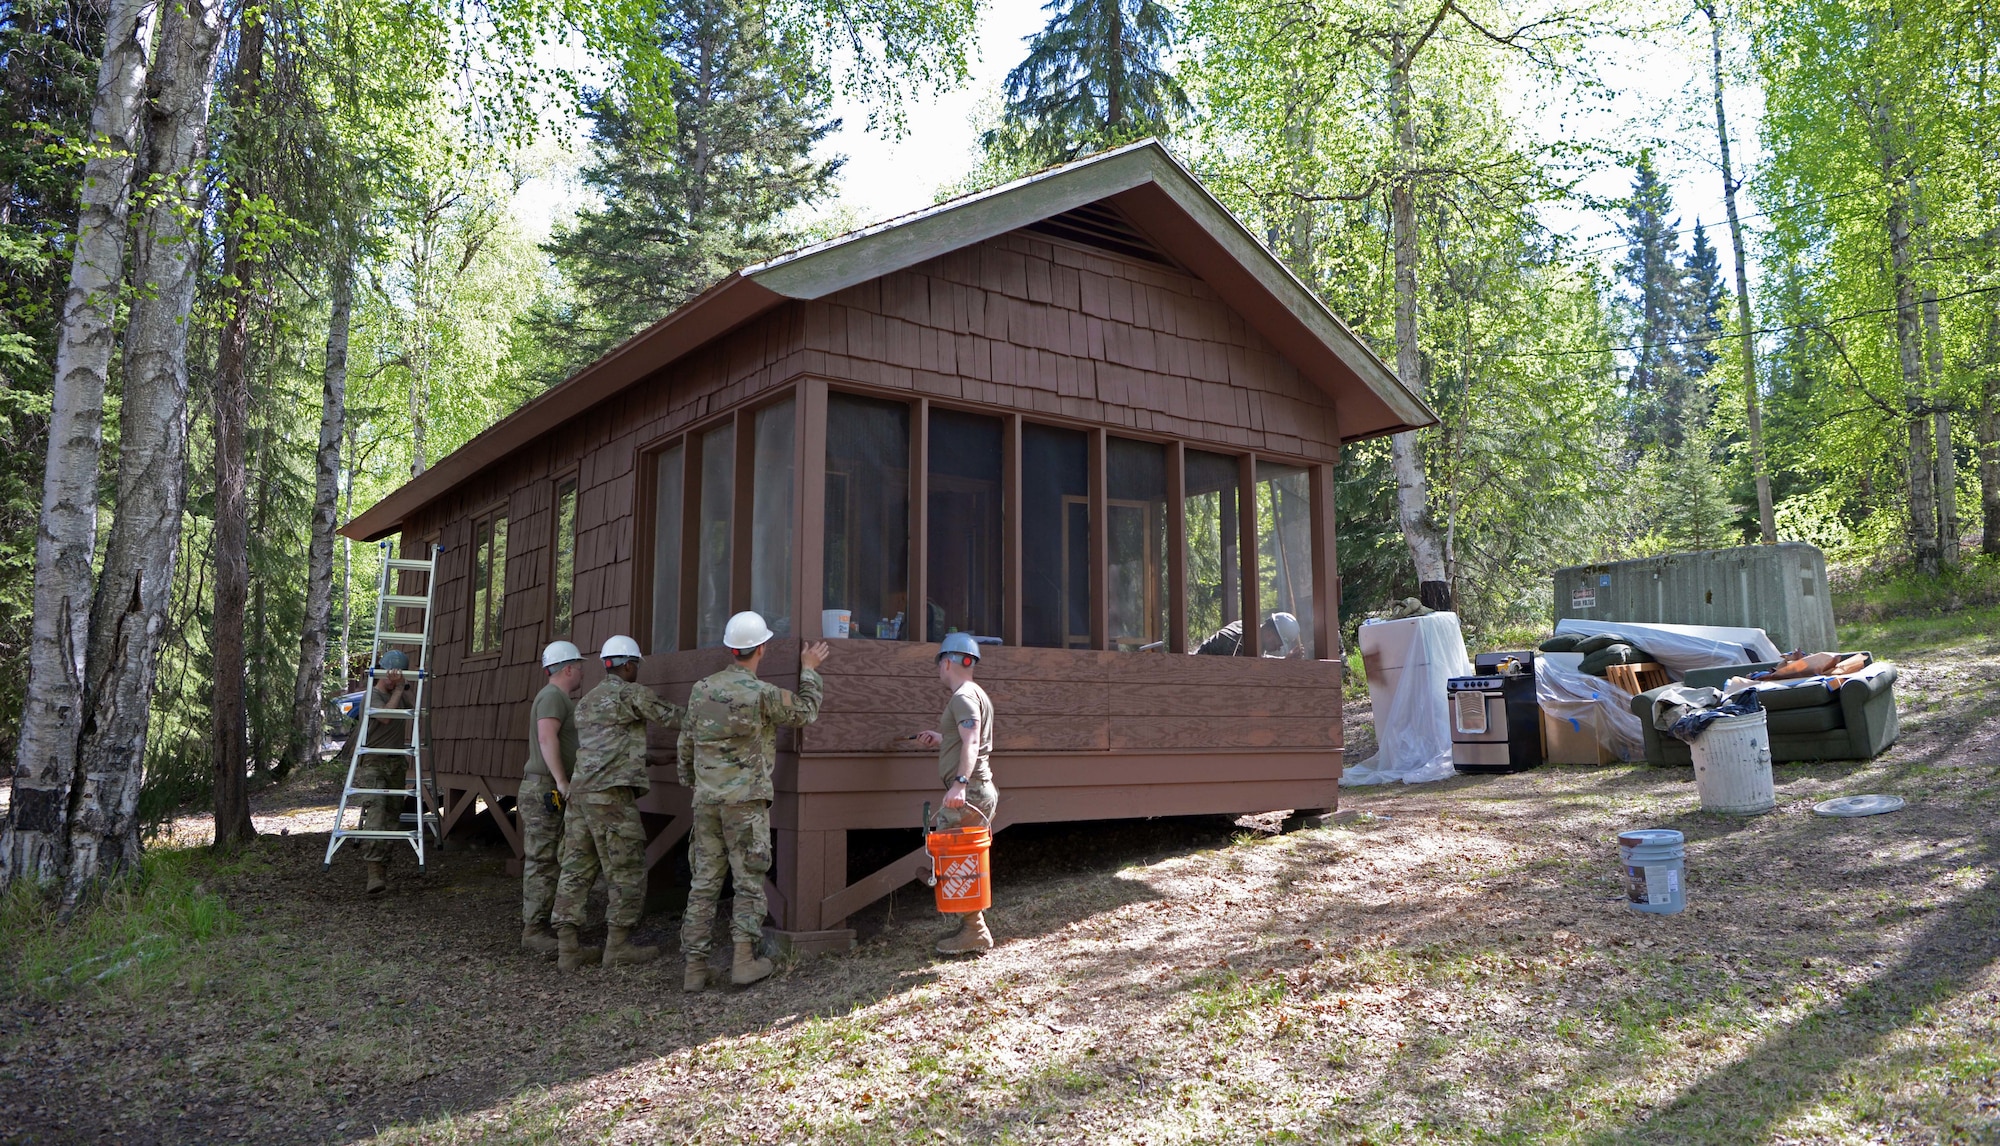 U.S. Air Force Airmen from the 354th Civil Engineer Squadron renovate a cabin during a troop training project May 26, 2021, at the Birch Lake Military Recreation Area, Alaska. Troop training projects are a multi-craft annual readiness requirement for members of civil engineer squadrons that allow them to work together to construct a high quality product in a simulated contingency environment. (U.S. Air Force photo by Senior Airman Beaux Hebert)